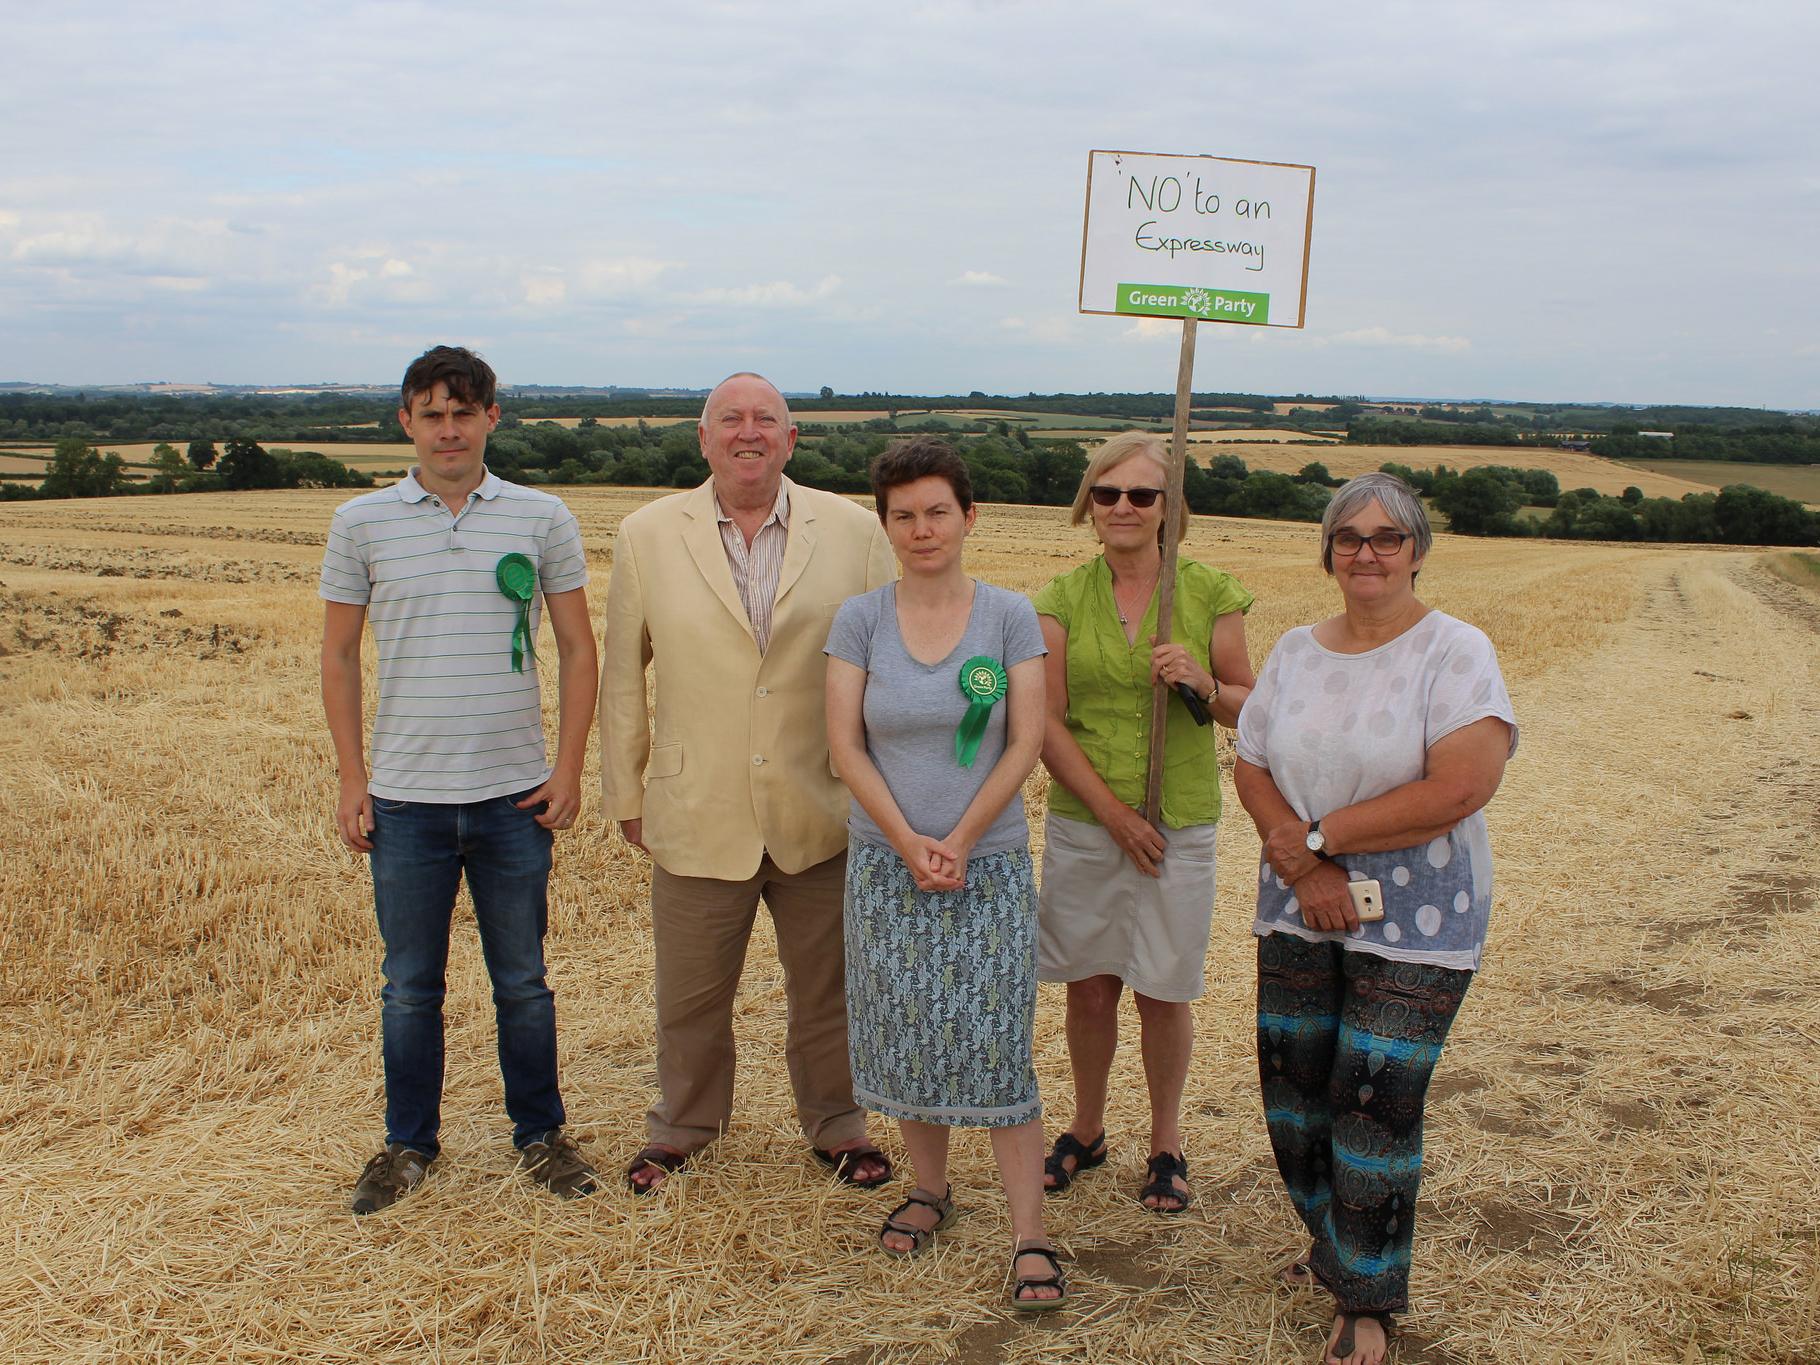 Keith Taylor (second from left) with activists in Oxfordshire who are opposed to the construction of the new expressway